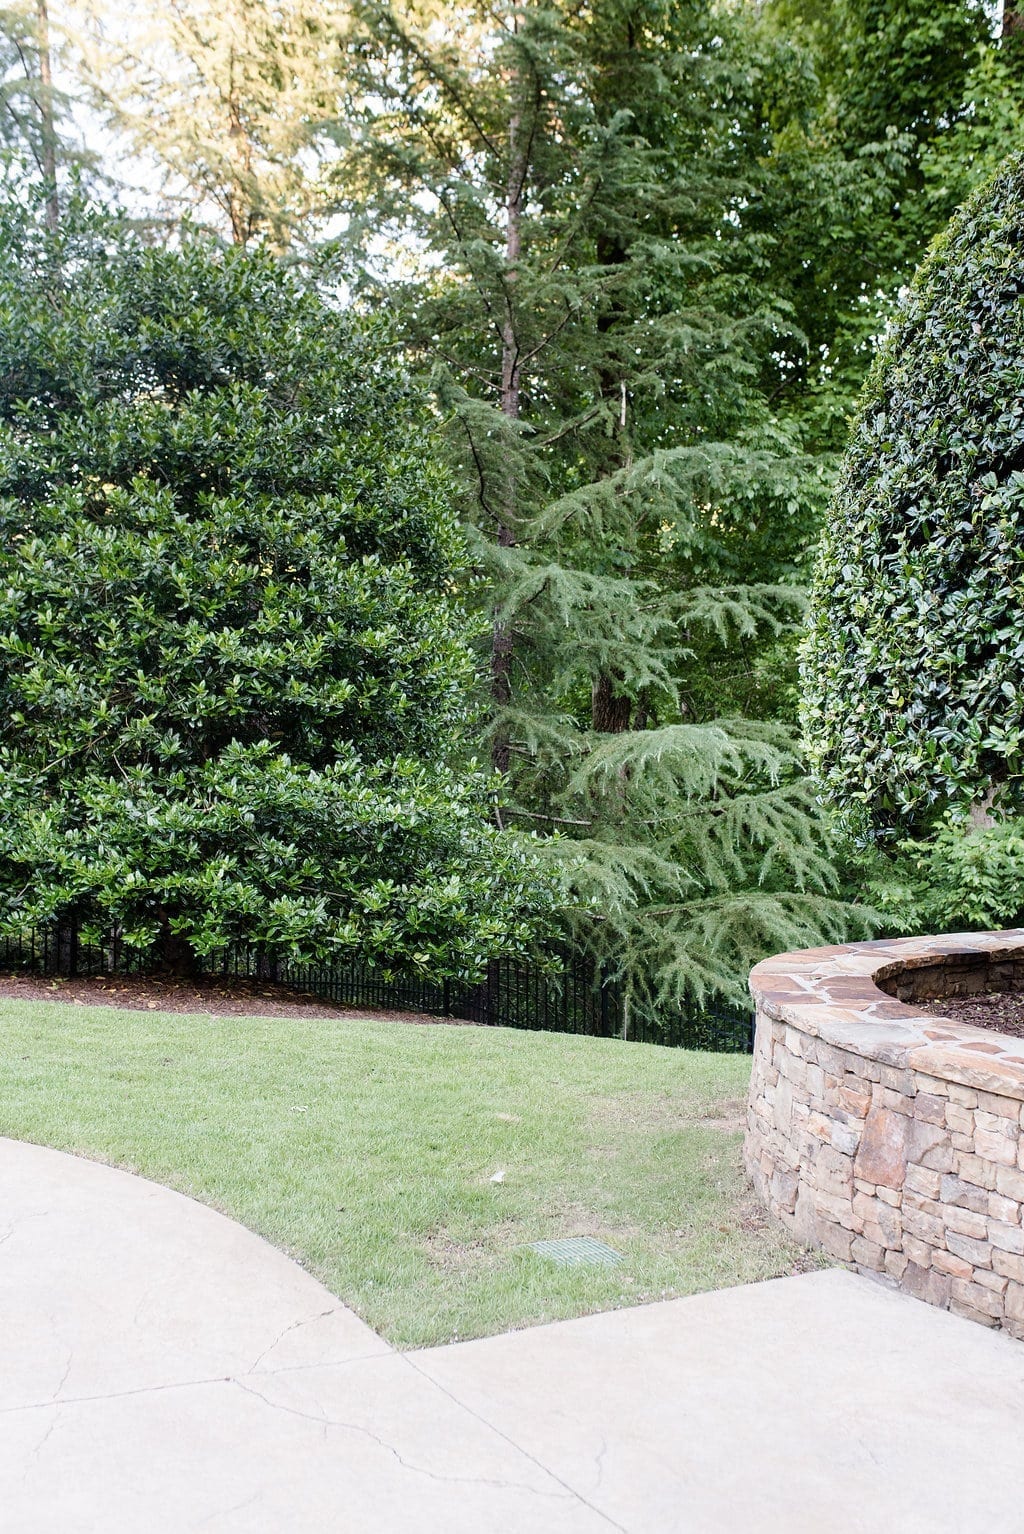 Using holly trees for yard privacy and backyard screening.